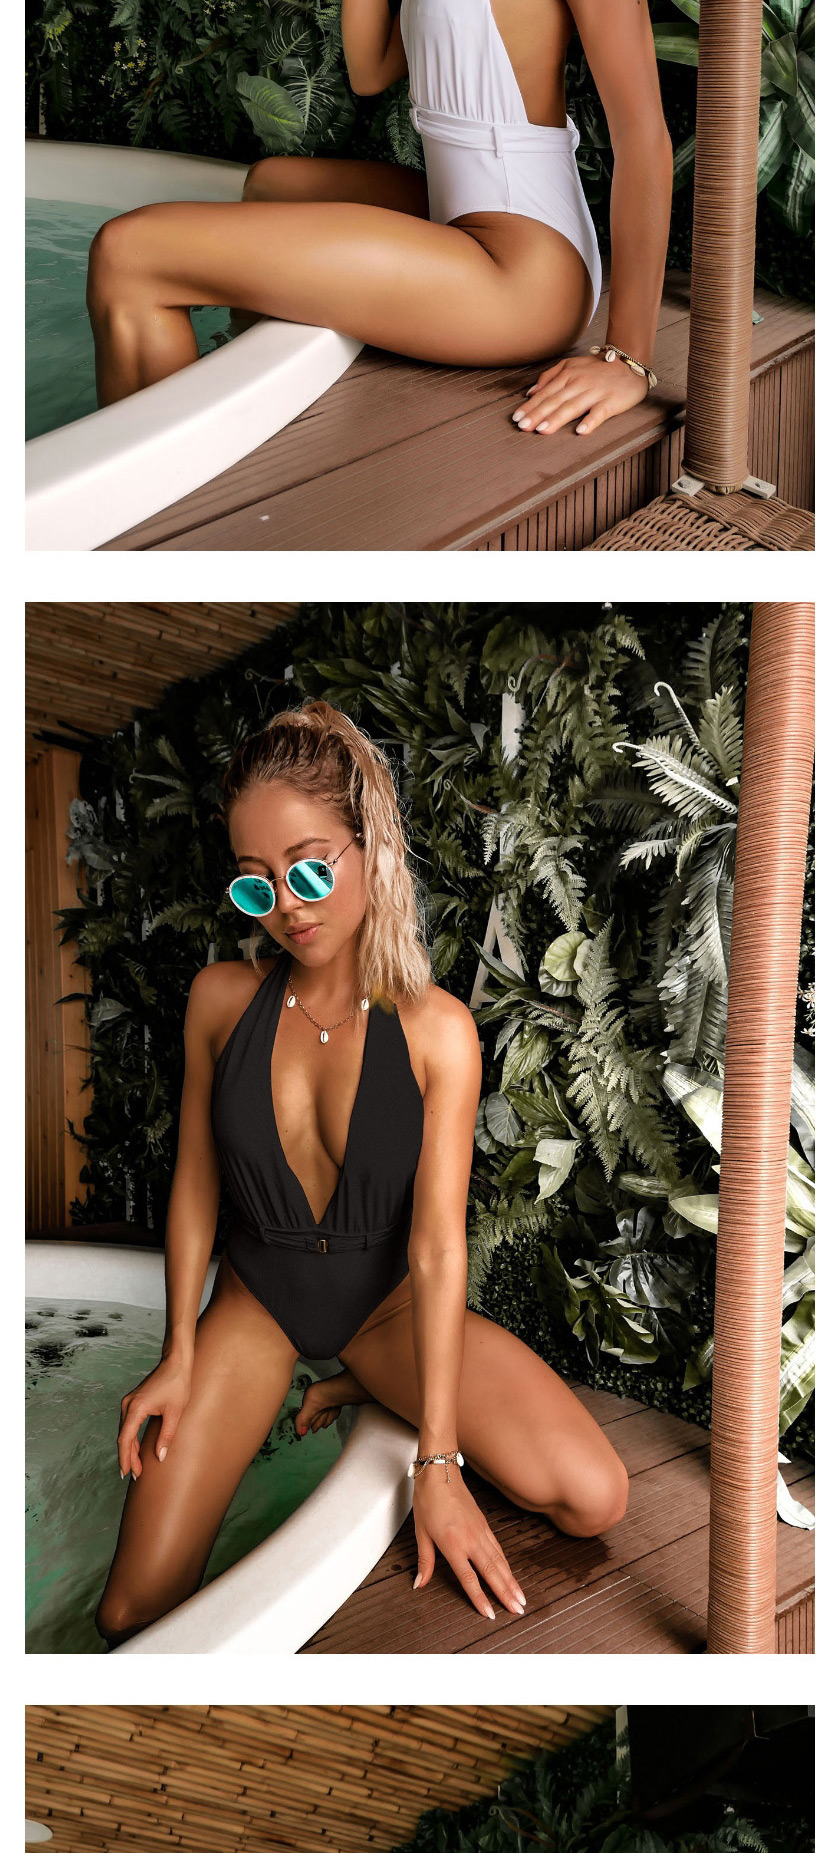 Fashion White Belted V-neck Halter Sleeveless One-piece Swimsuit,One Pieces